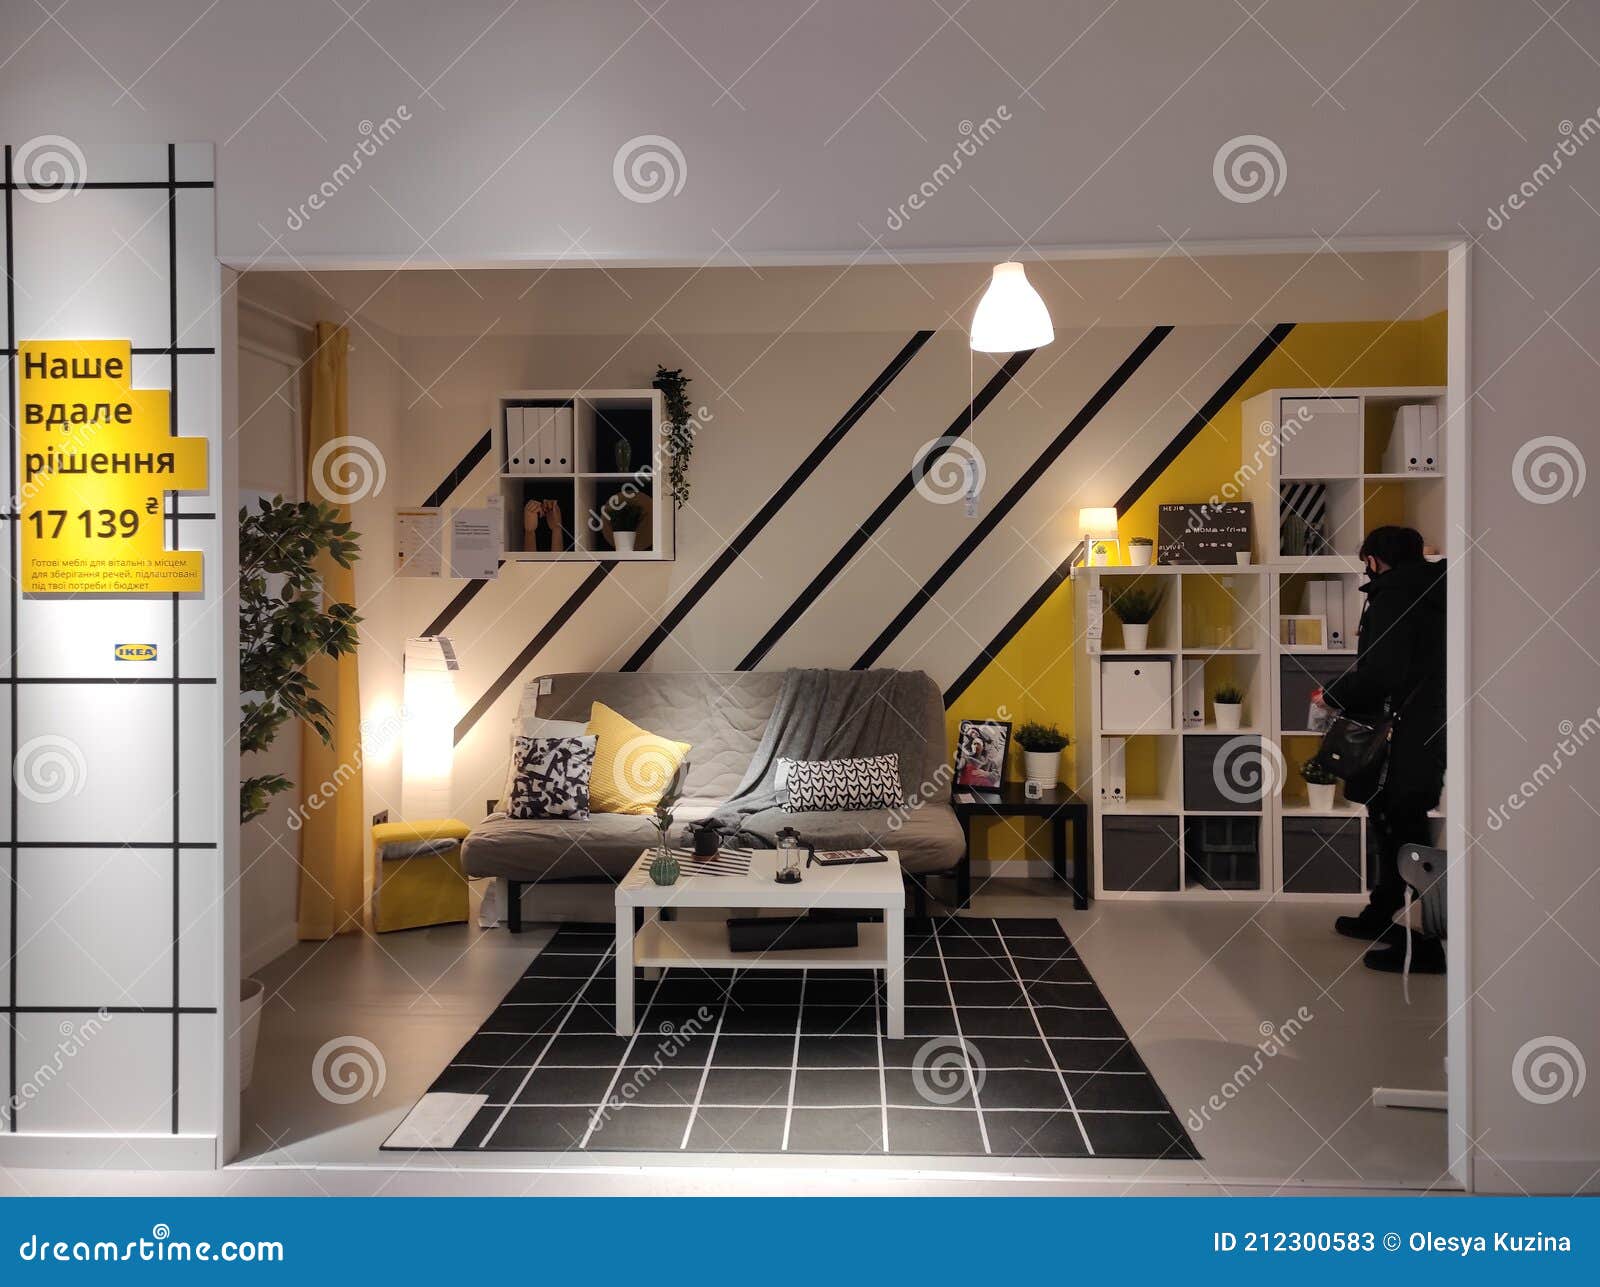 Ukraine - March 4, 2021: Exhibition at the IKEA Store. Living Room Stock Image Image editorial, shop: 212300583